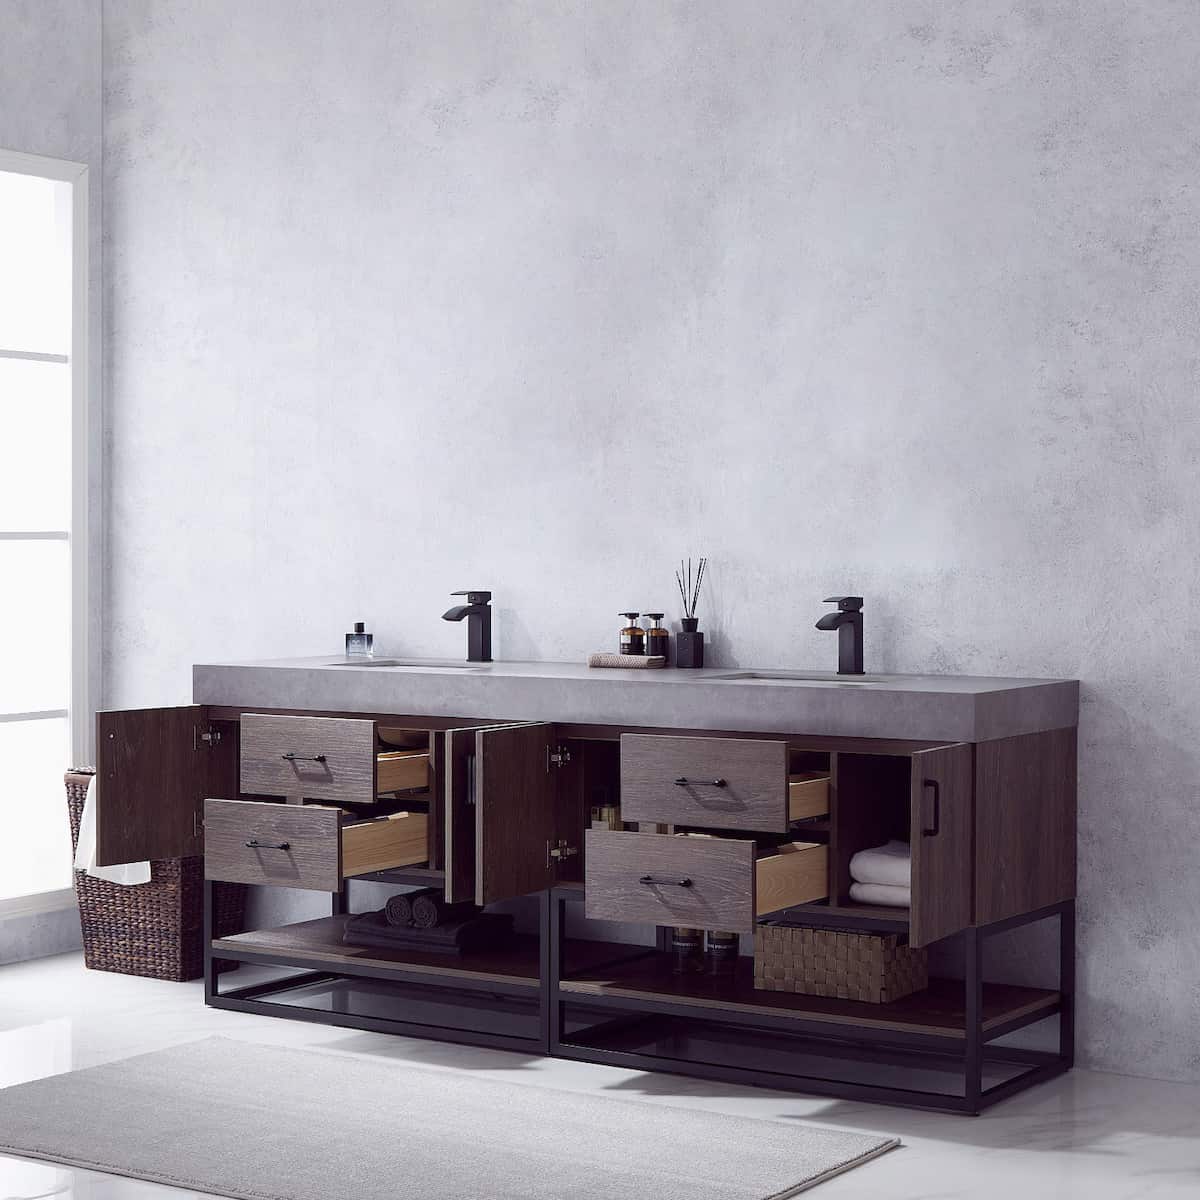 Vinnova Alistair 84 Inch Freestanding Double Sink Bath Vanity in North Carolina Oak and Matte Black Frame with Grey Sintered Stone Top Without Mirrors Inside 789084B-NC-WK-NM